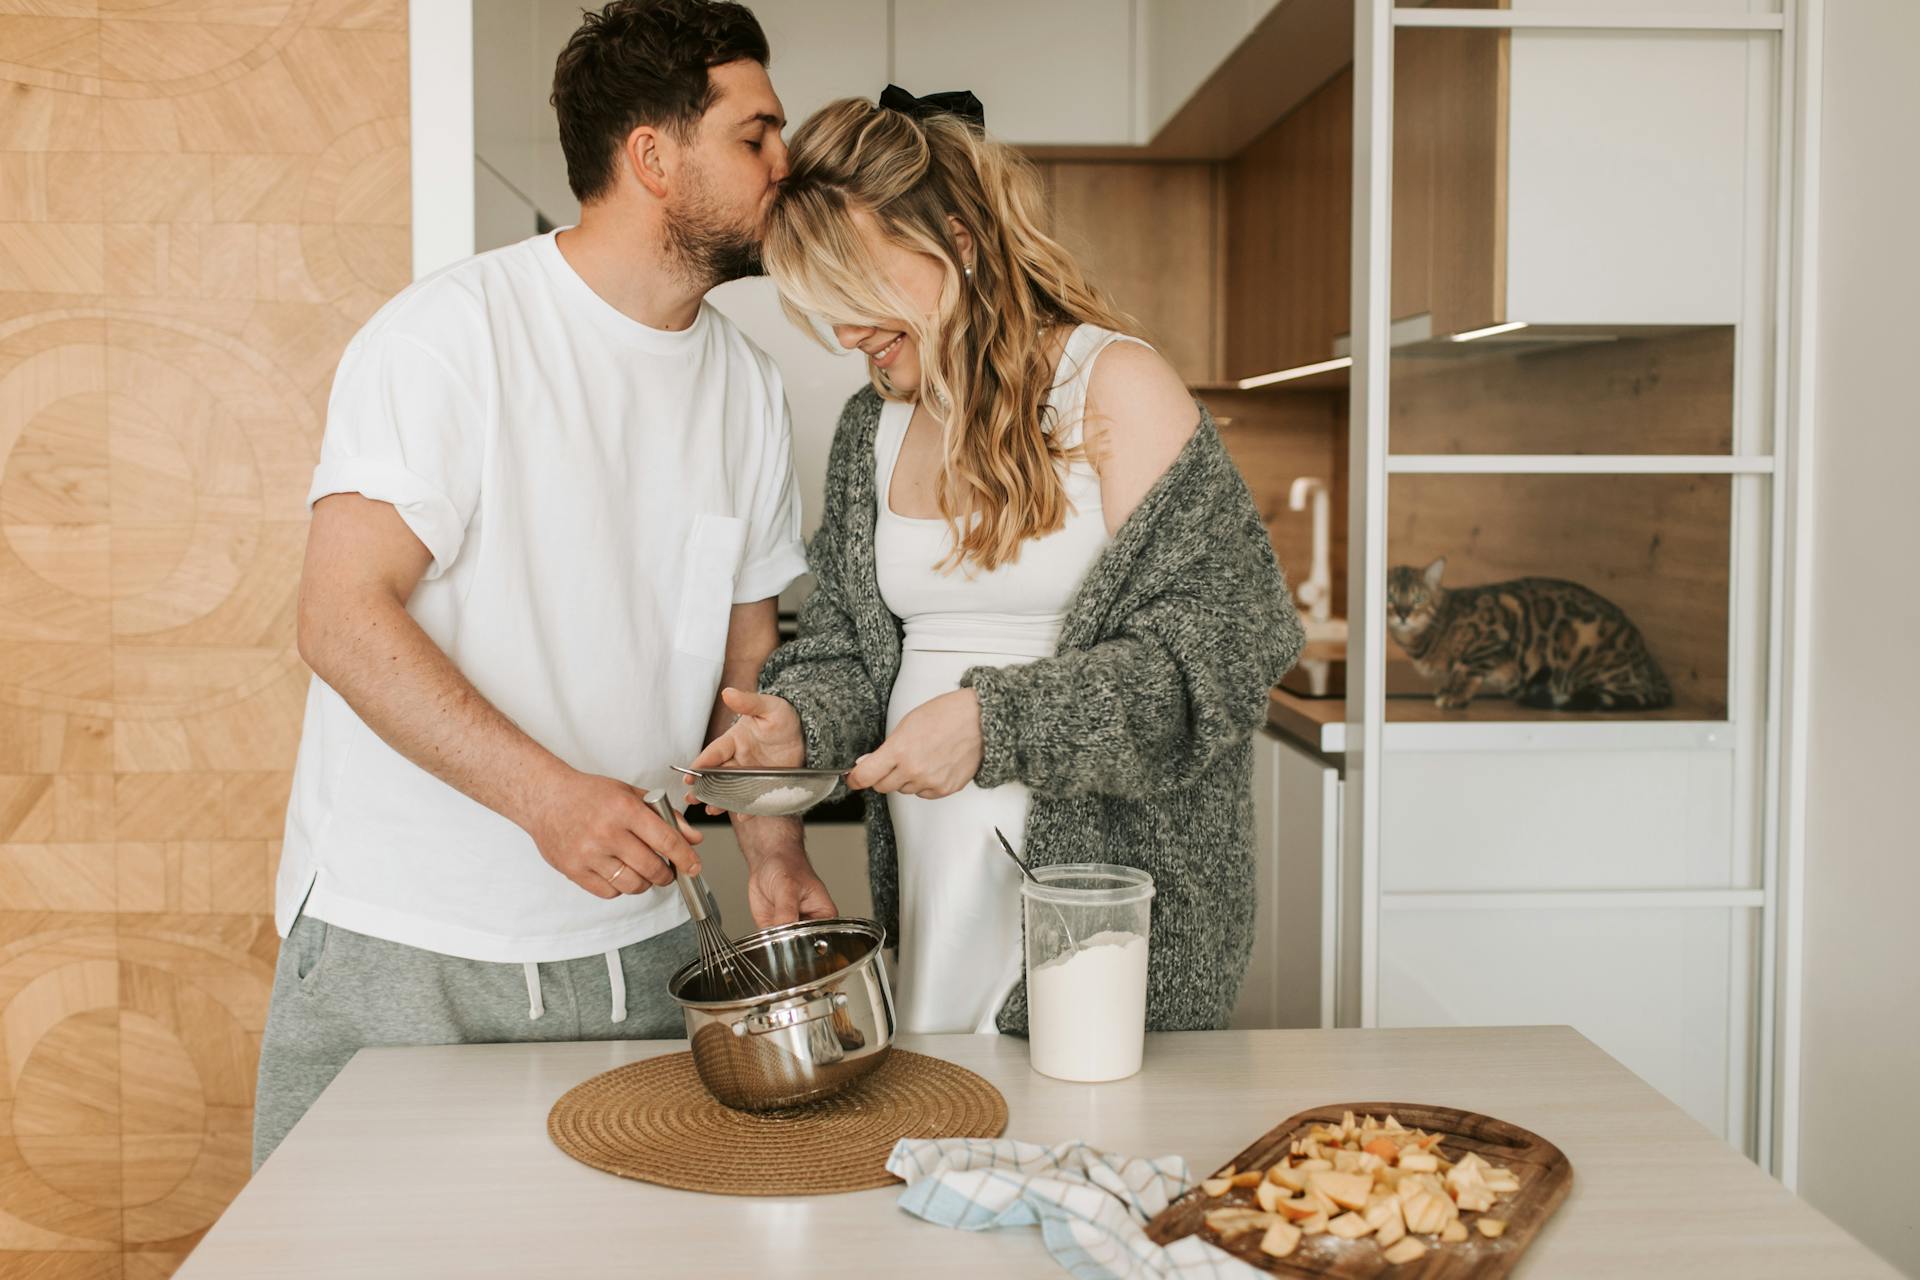 A husband kissing his pregnant wife's forehead while cooking | Source: Pexels